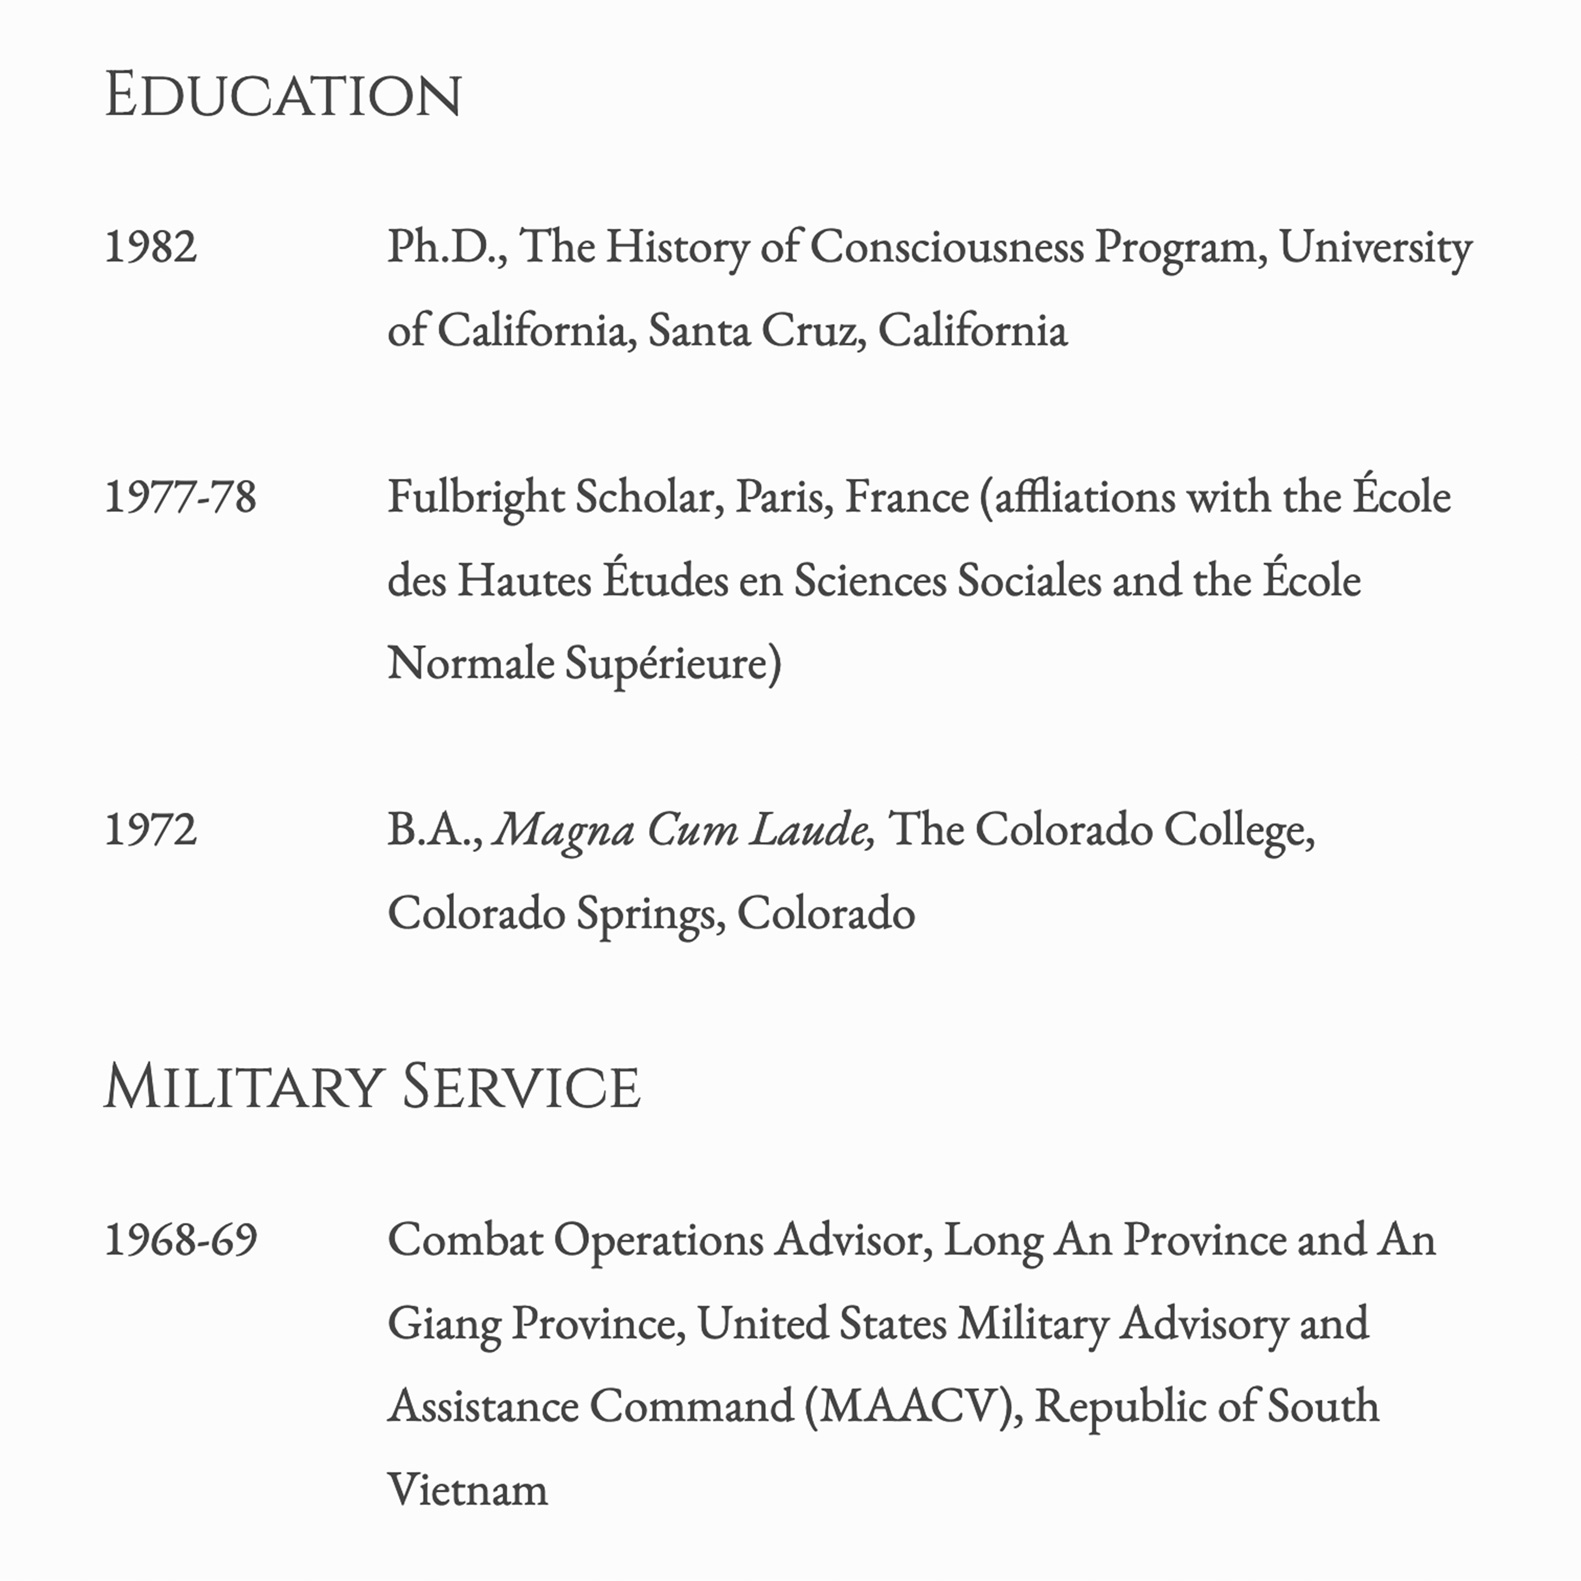 Snippet from curriculum vitae showing education and military service.